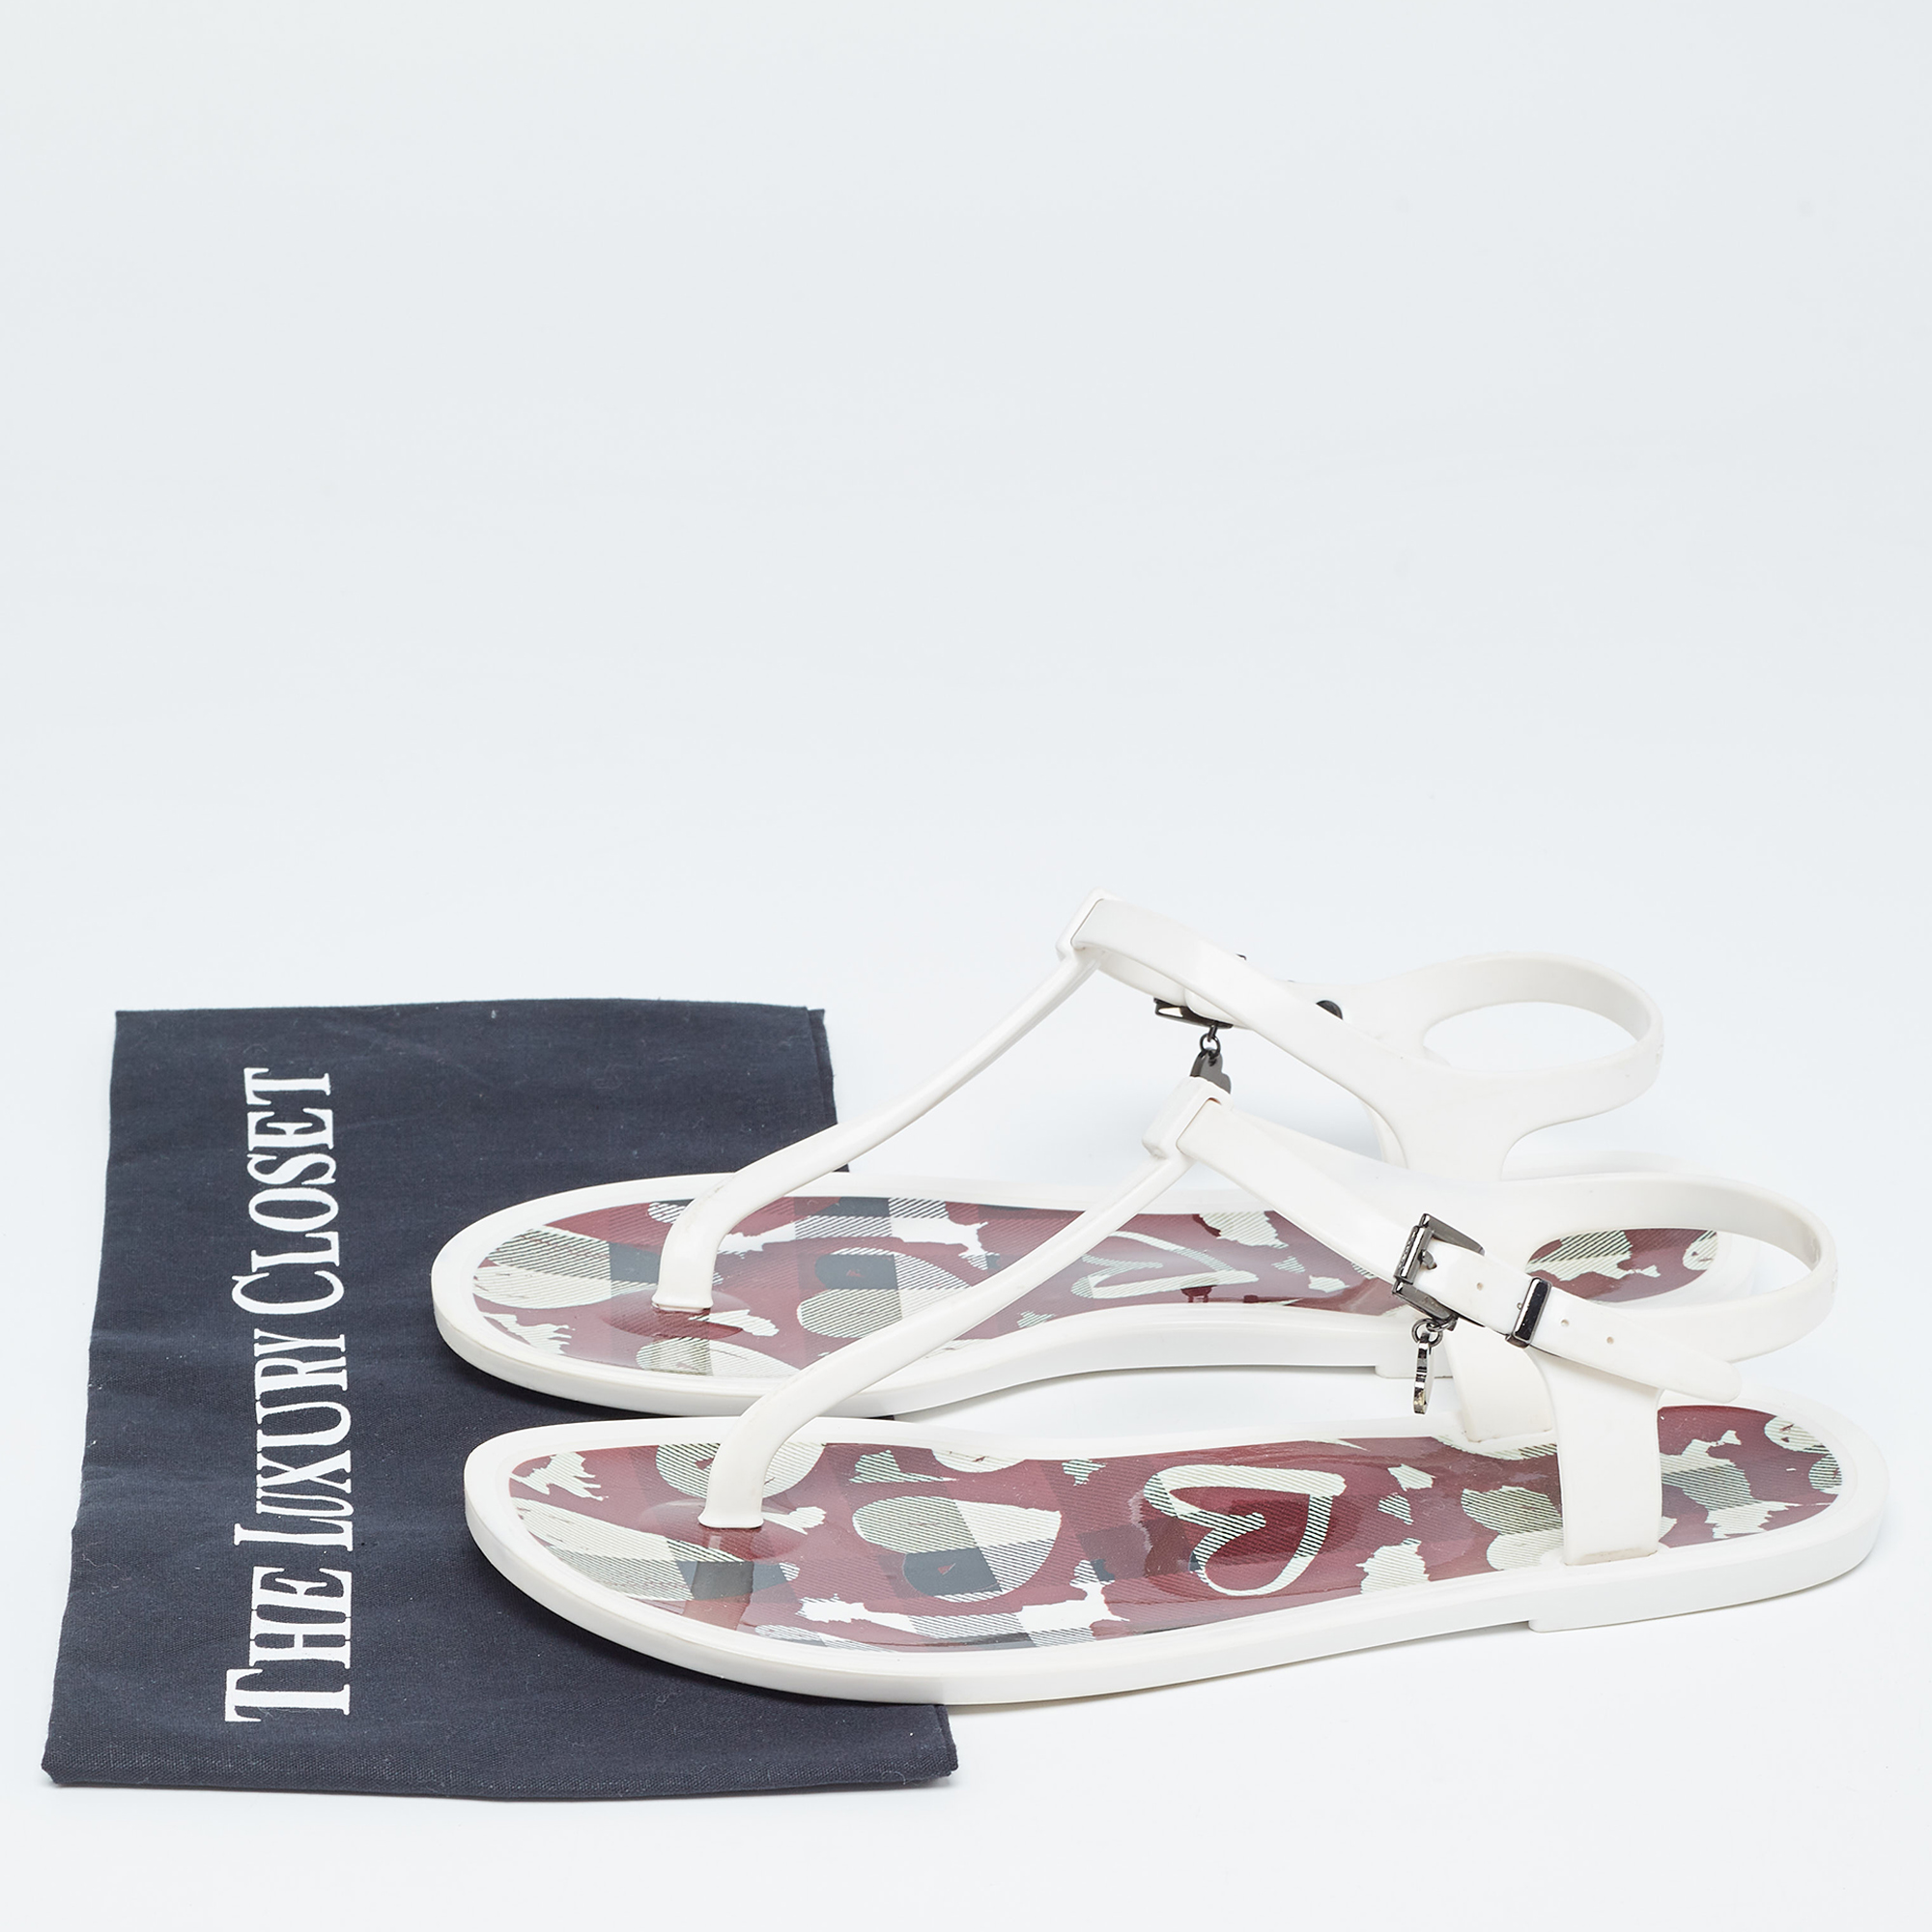 Burberry White Jelly Thong Sandals Size 40